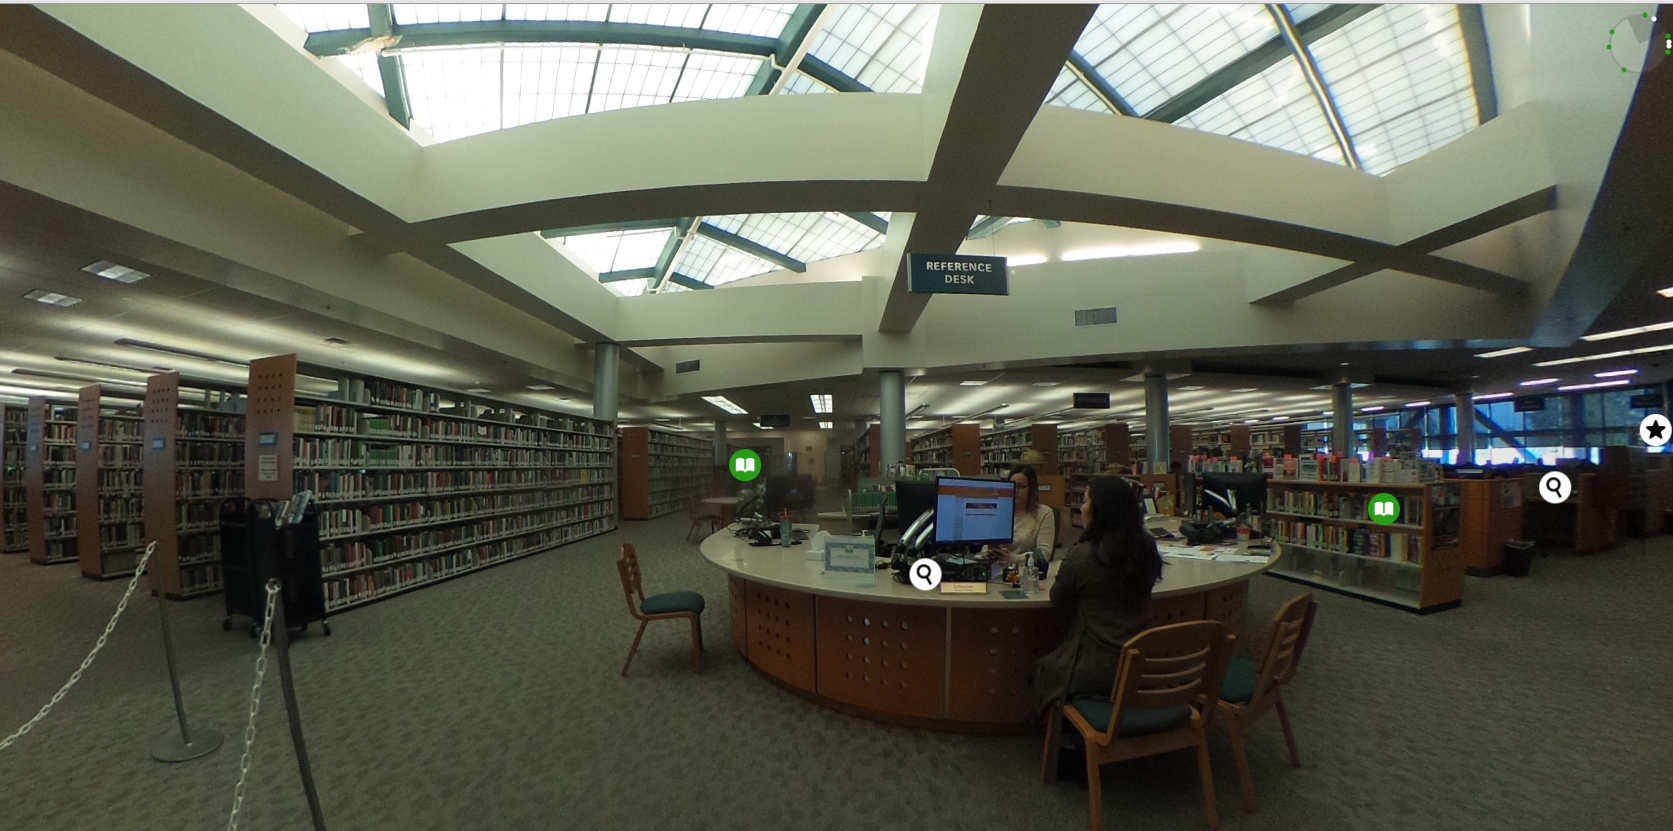 Screen shot of an image taken from the VC Library virtual tour provided by ThingLink